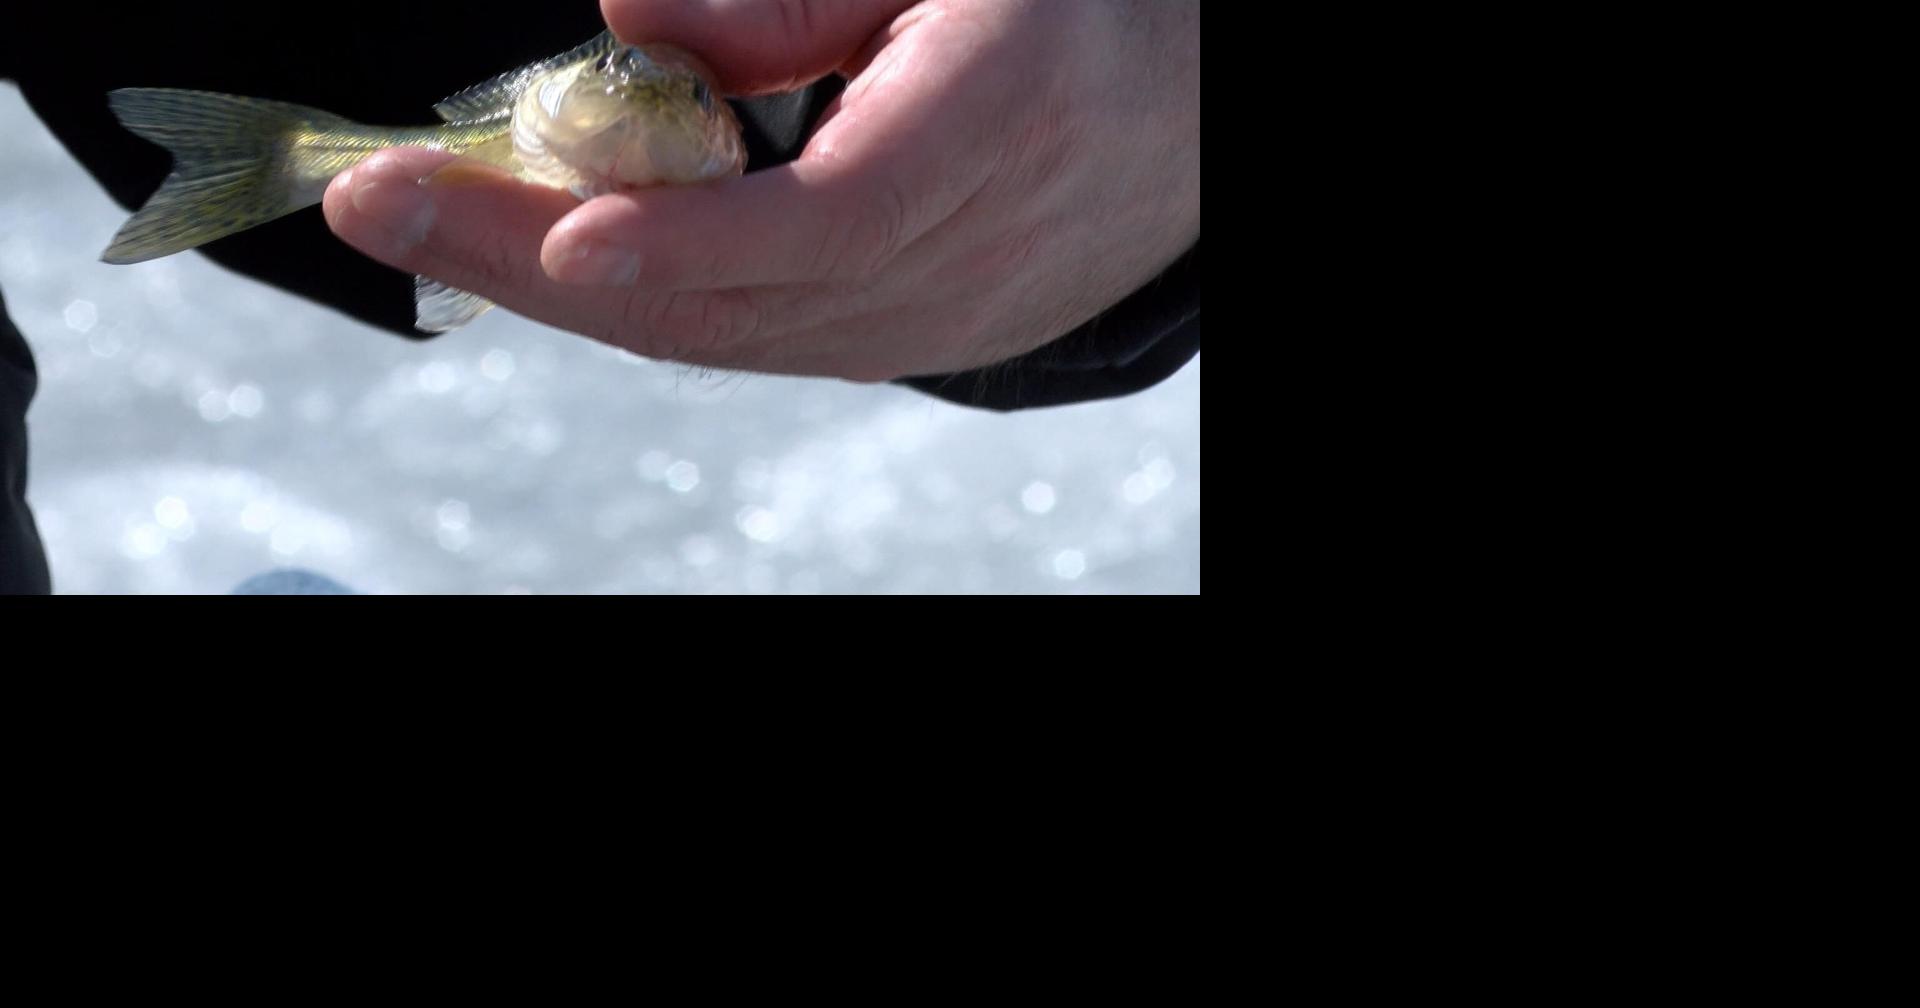 Proposals for walleye, catfish and deer regulations received